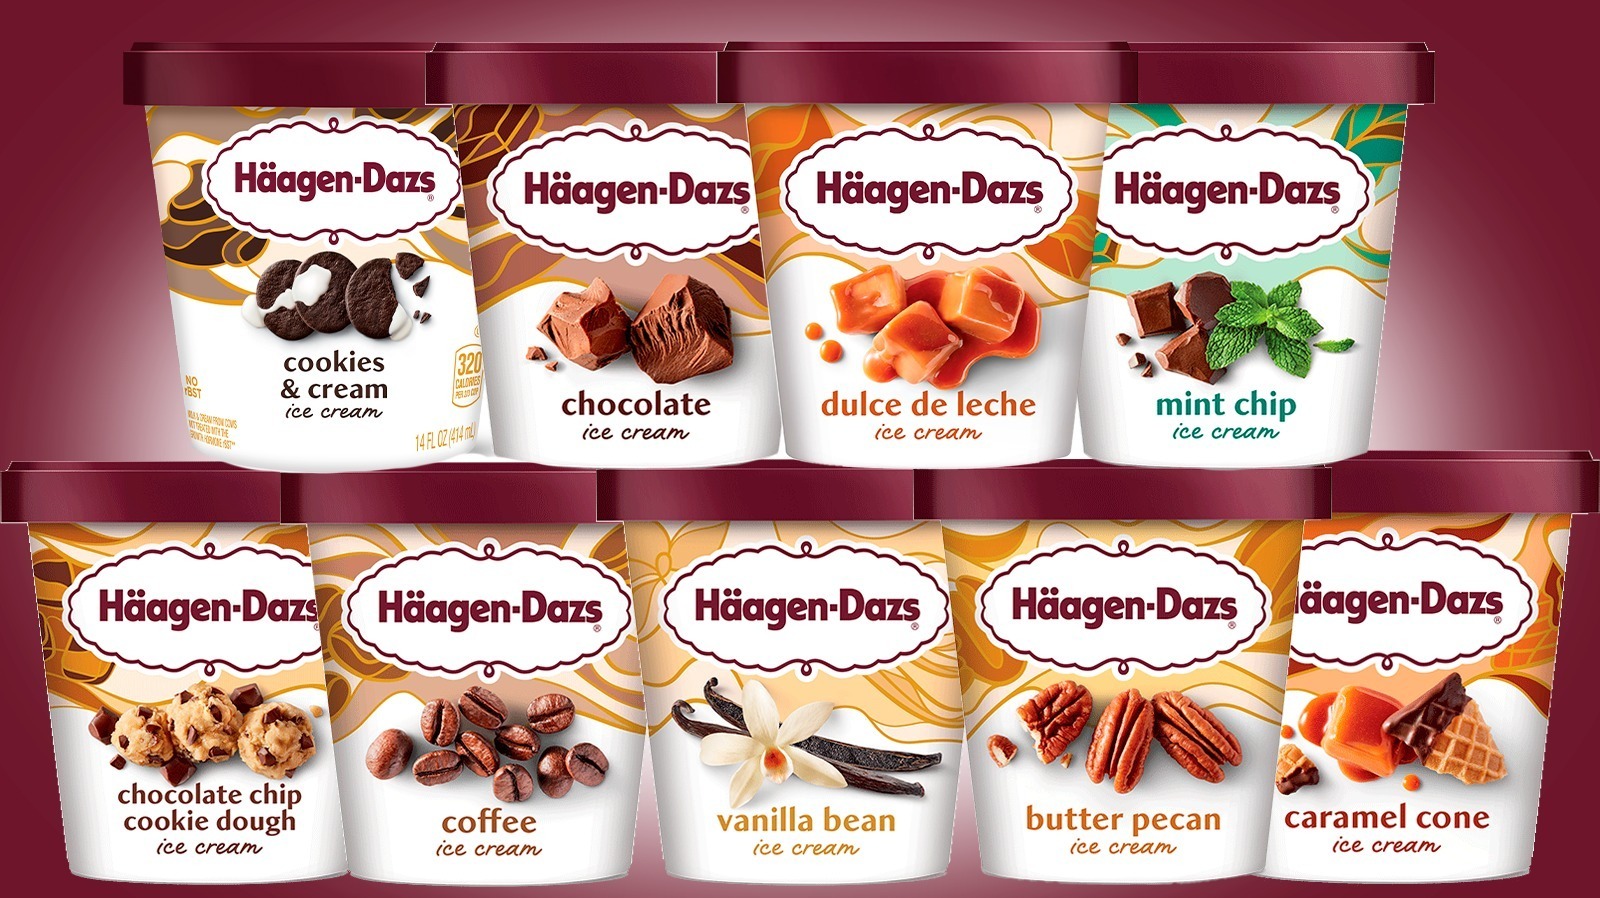 https://www.thedailymeal.com/img/gallery/19-haagen-dazs-flavors-ranked-worst-to-best/l-intro-1682011435.jpg